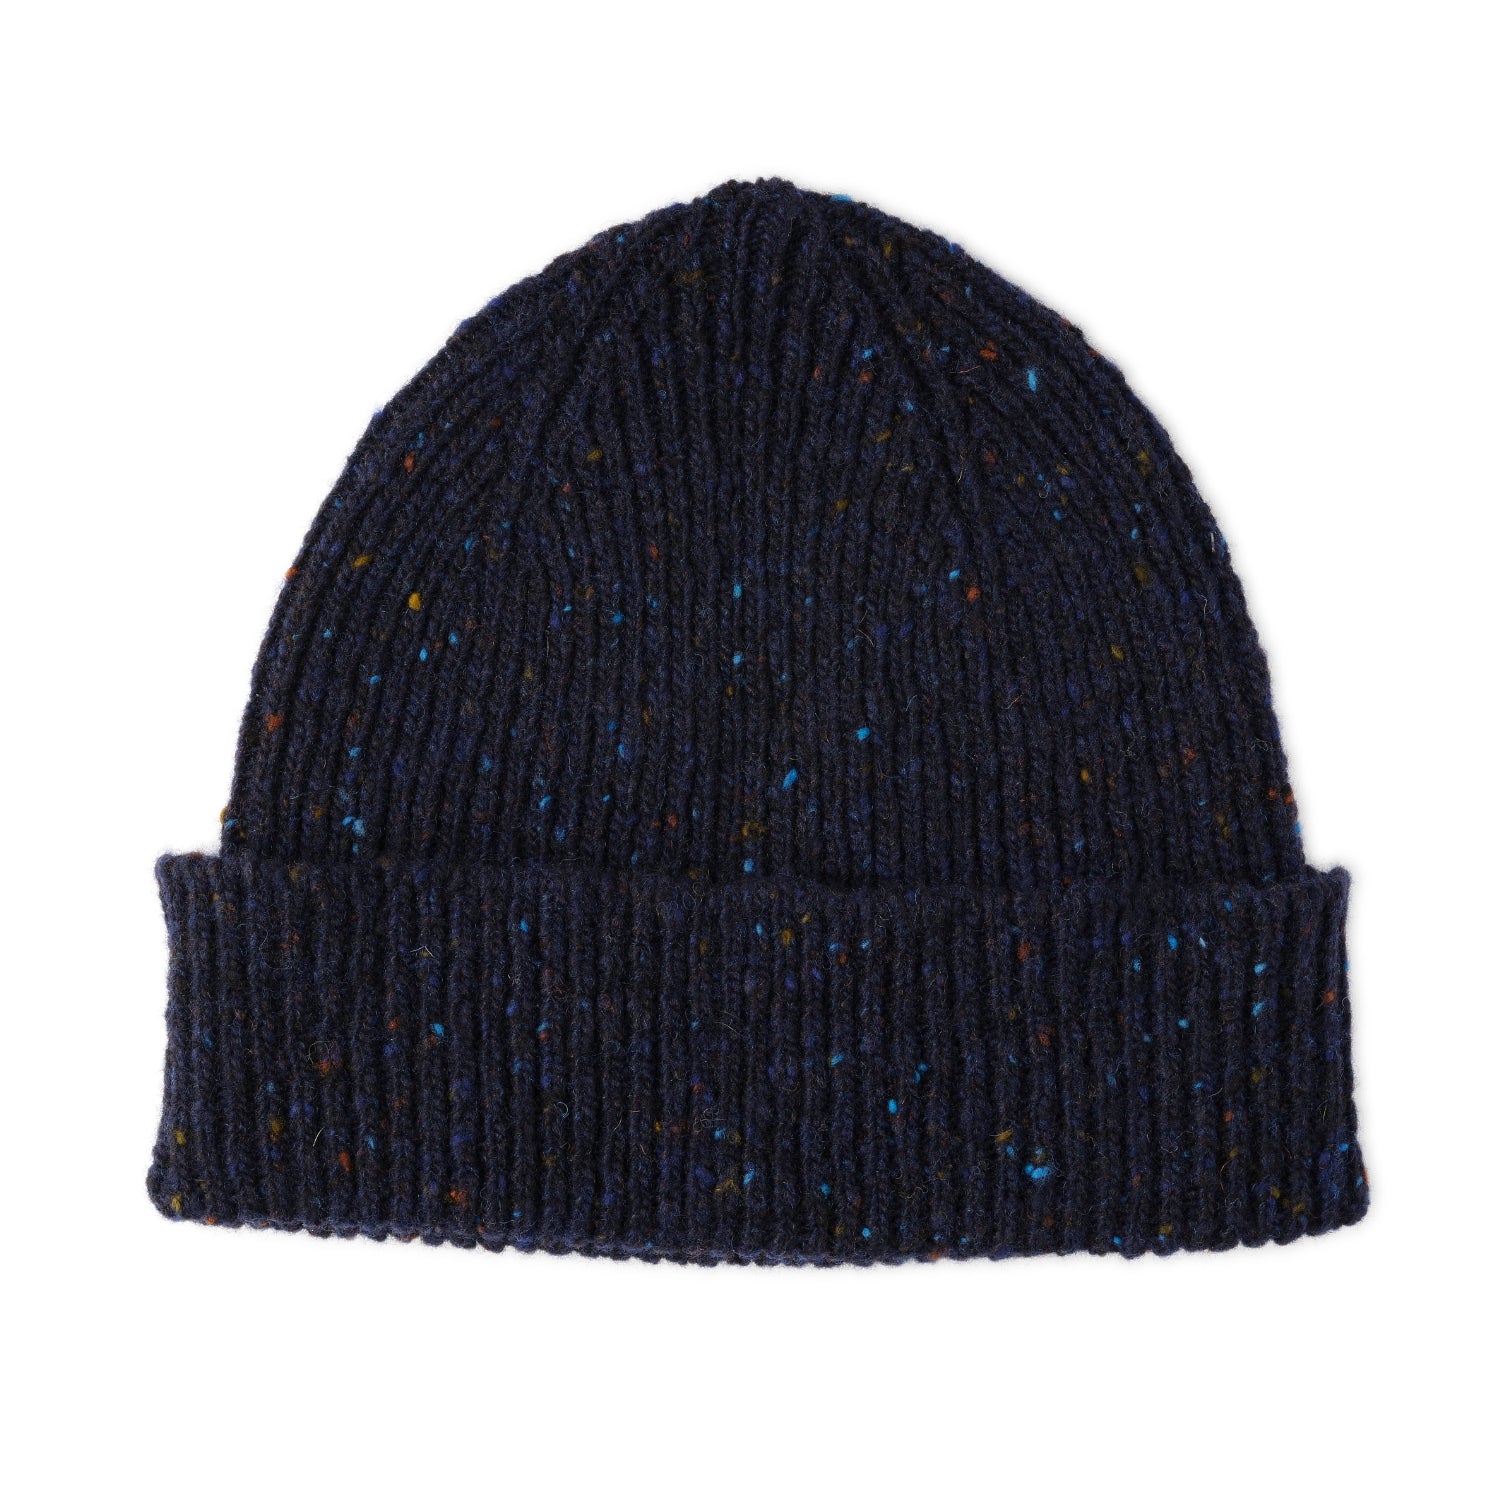 mens donegal wool blue beanie hat gift set